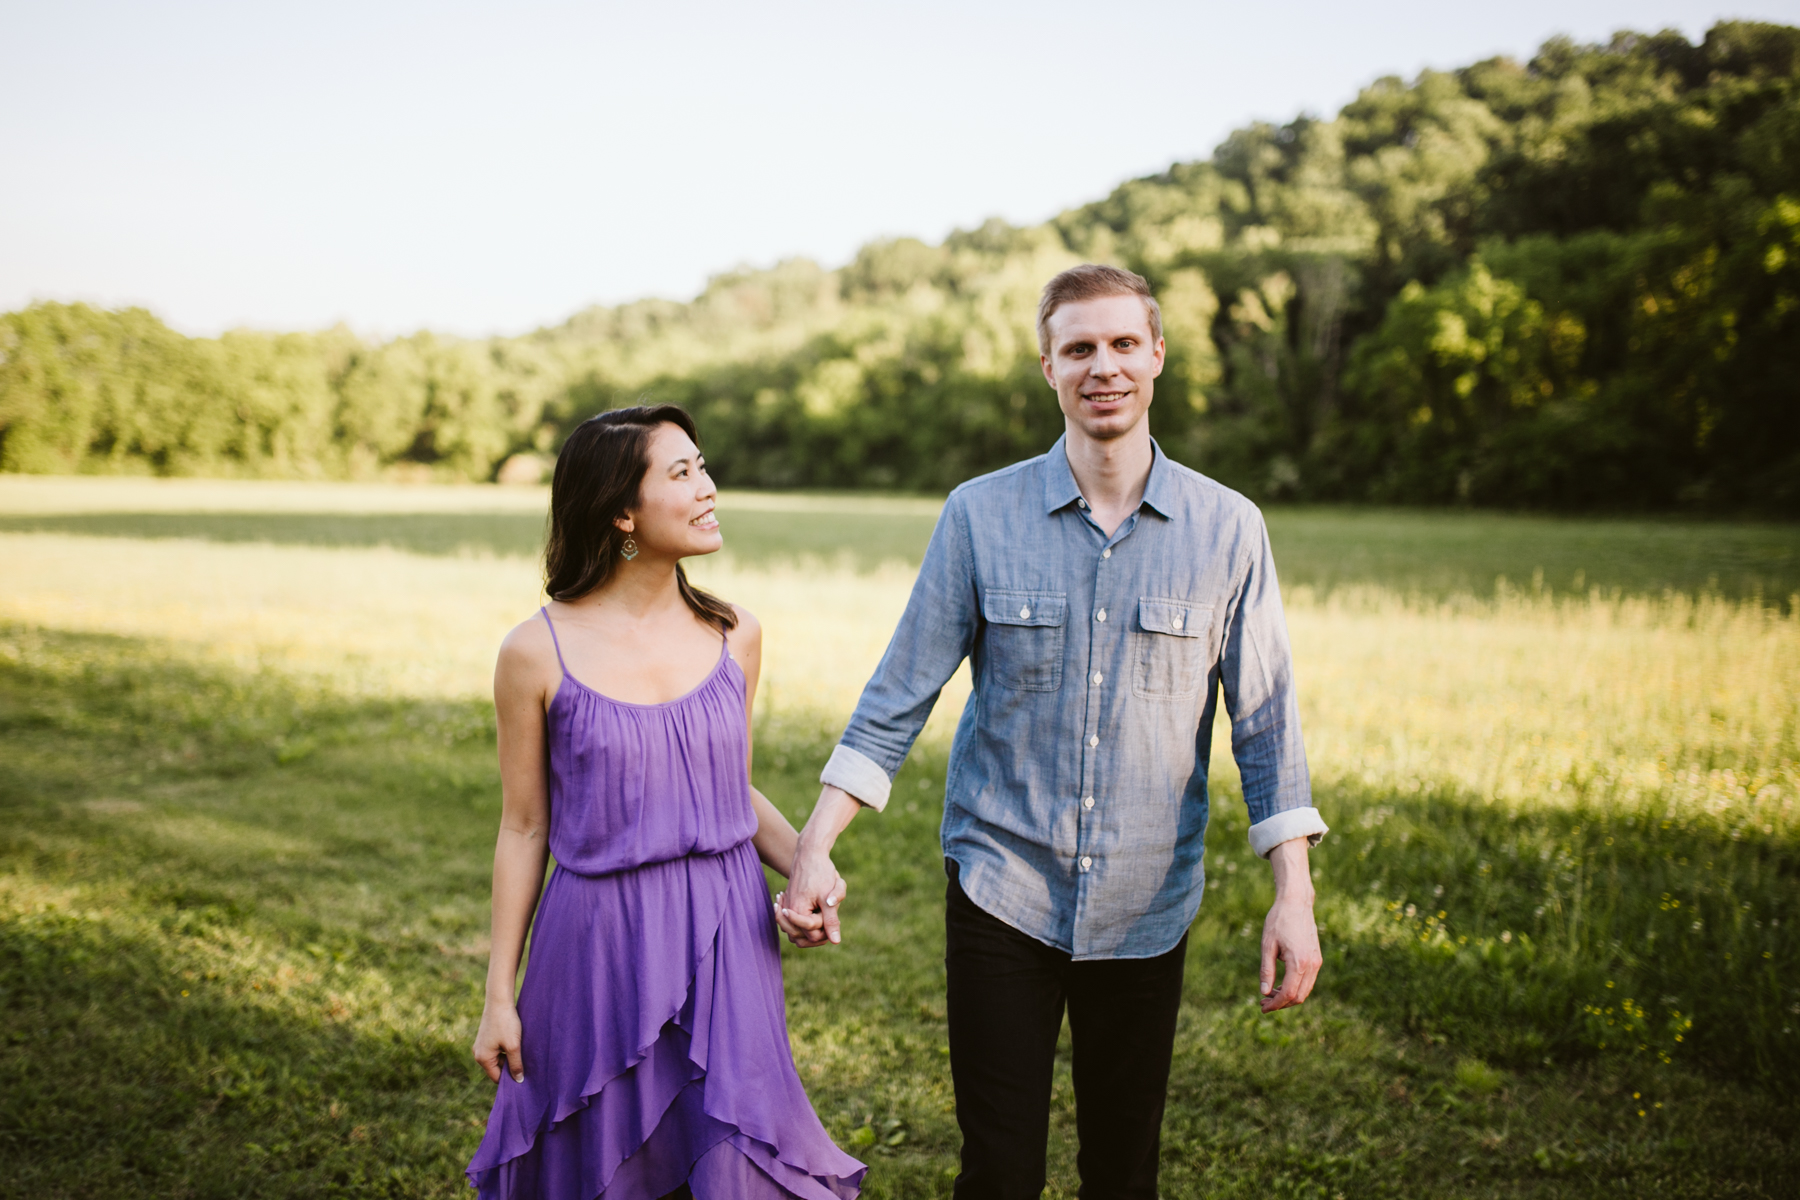 A sunny evening engagement session at green door gourmet in Nashville, Tennessee